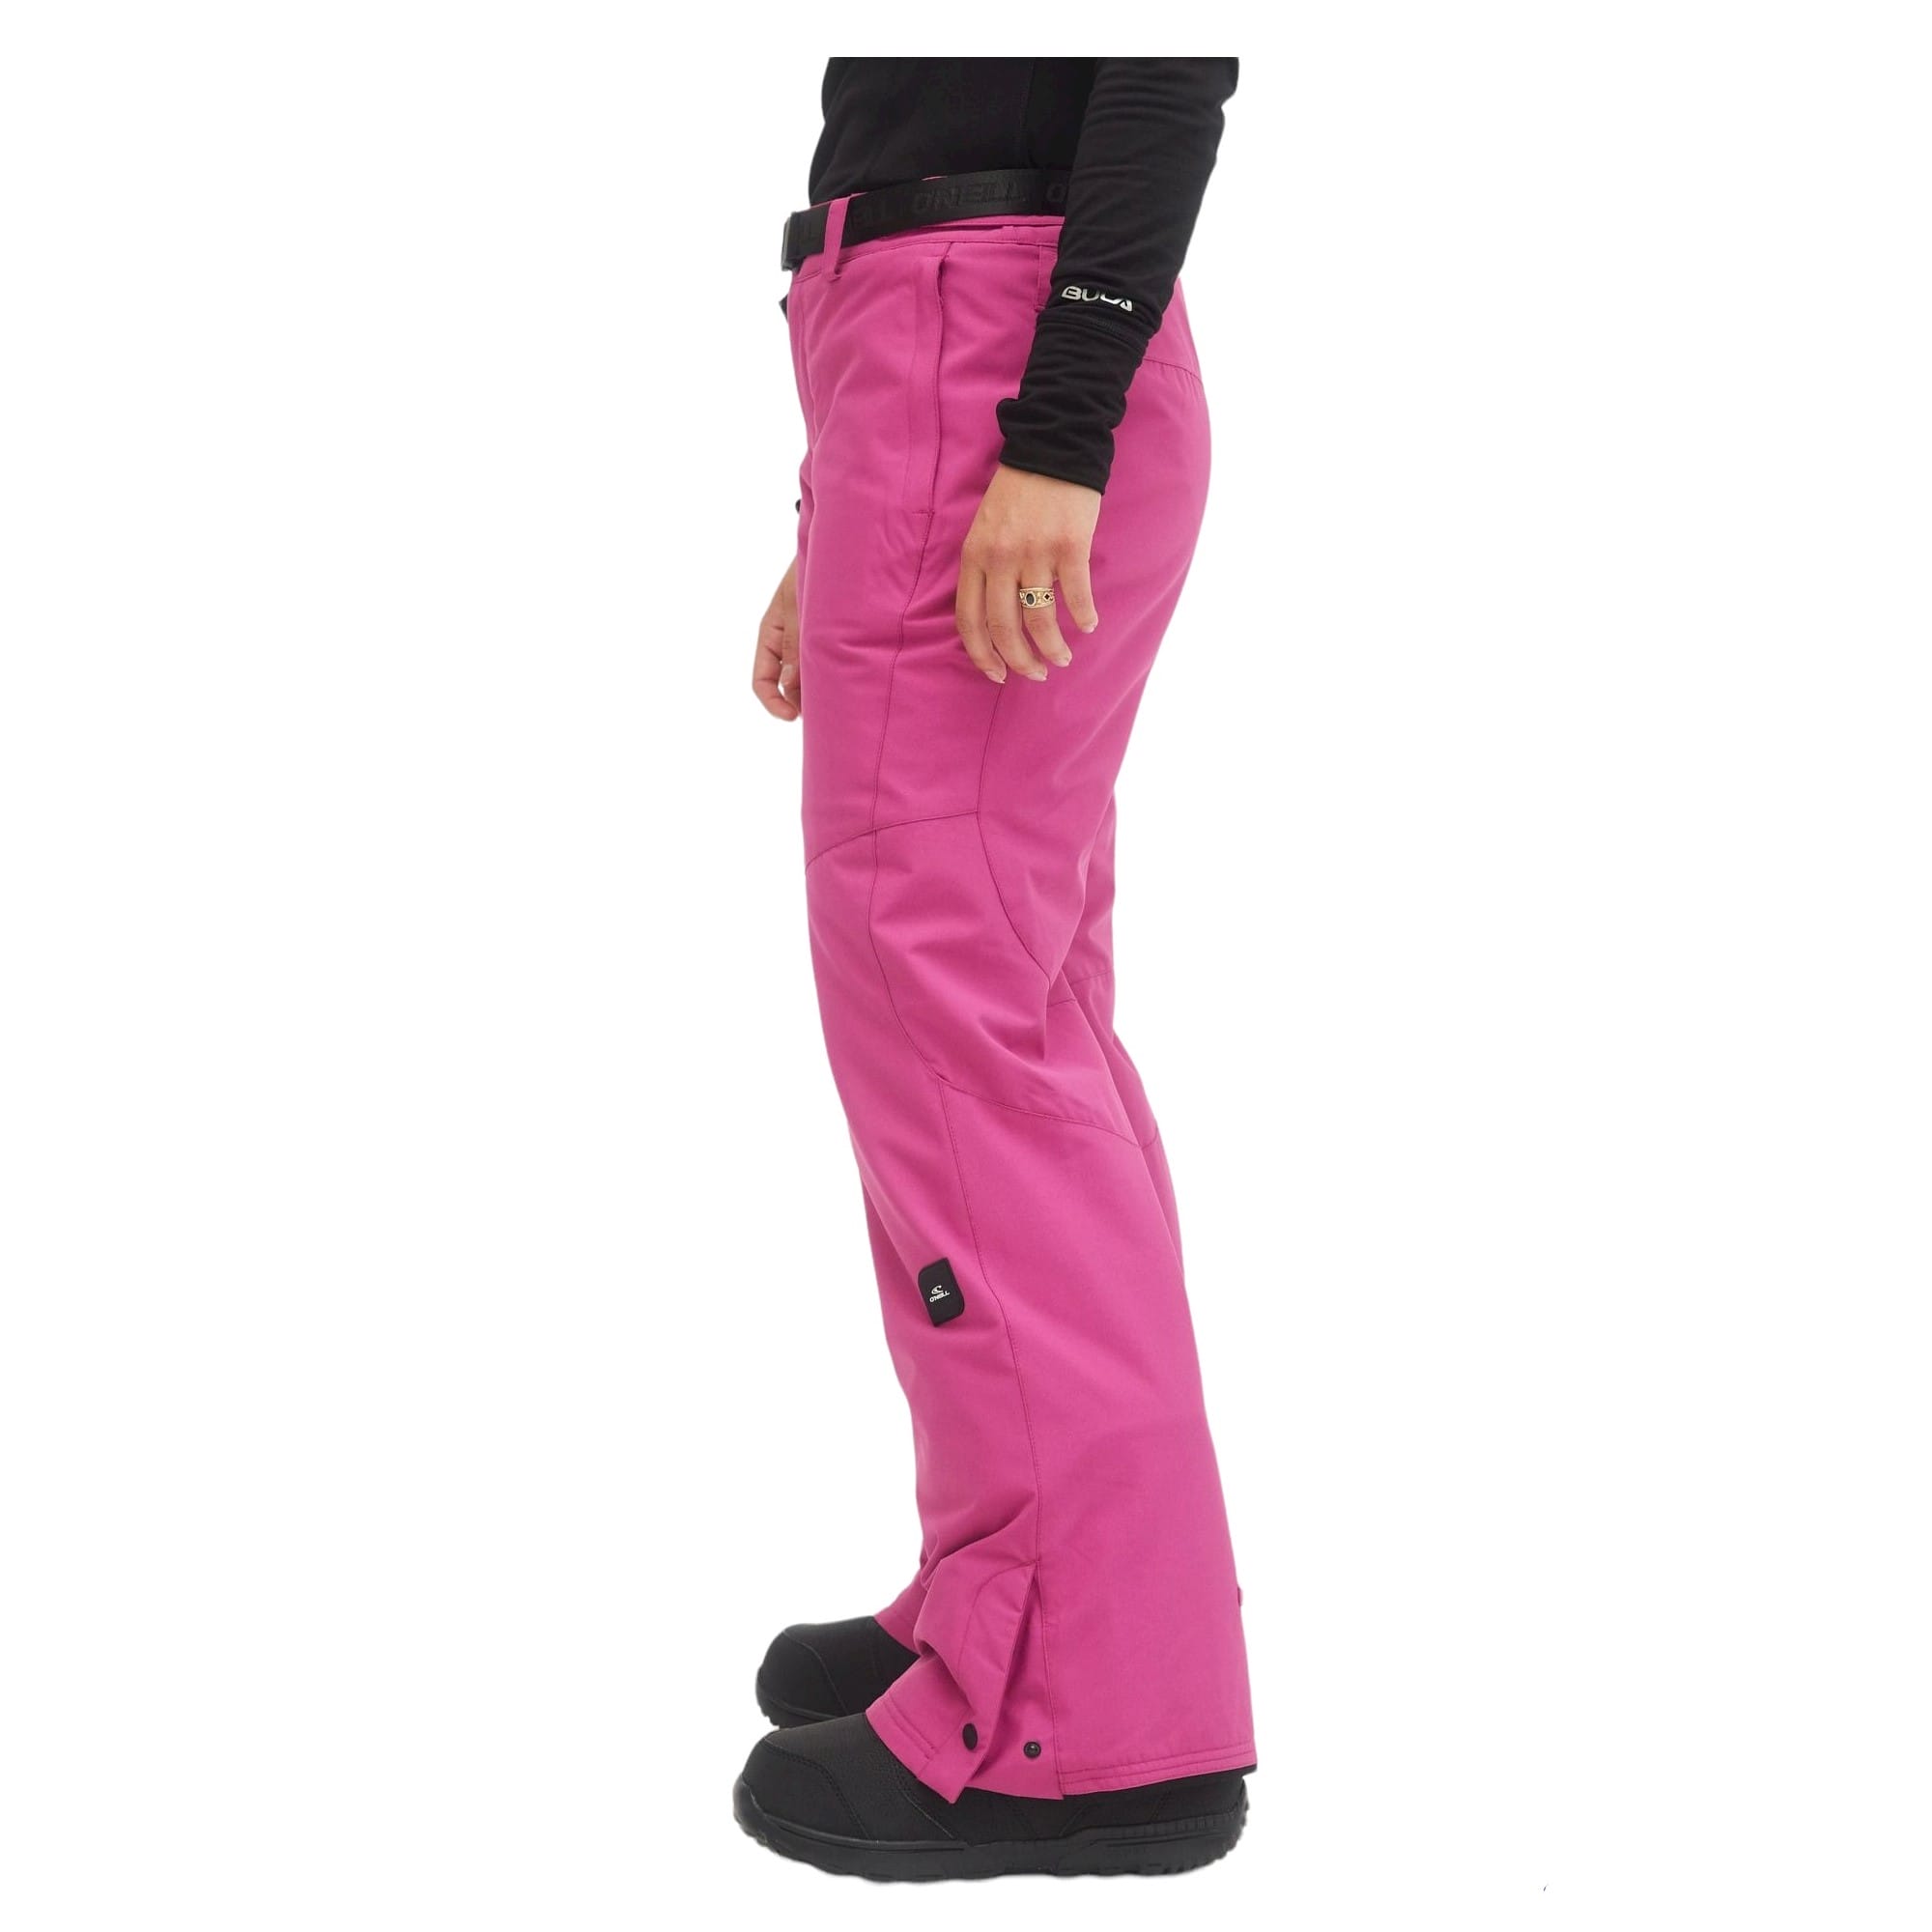 Women's ski pants Pink  Various styles & High quality! – O'Neill